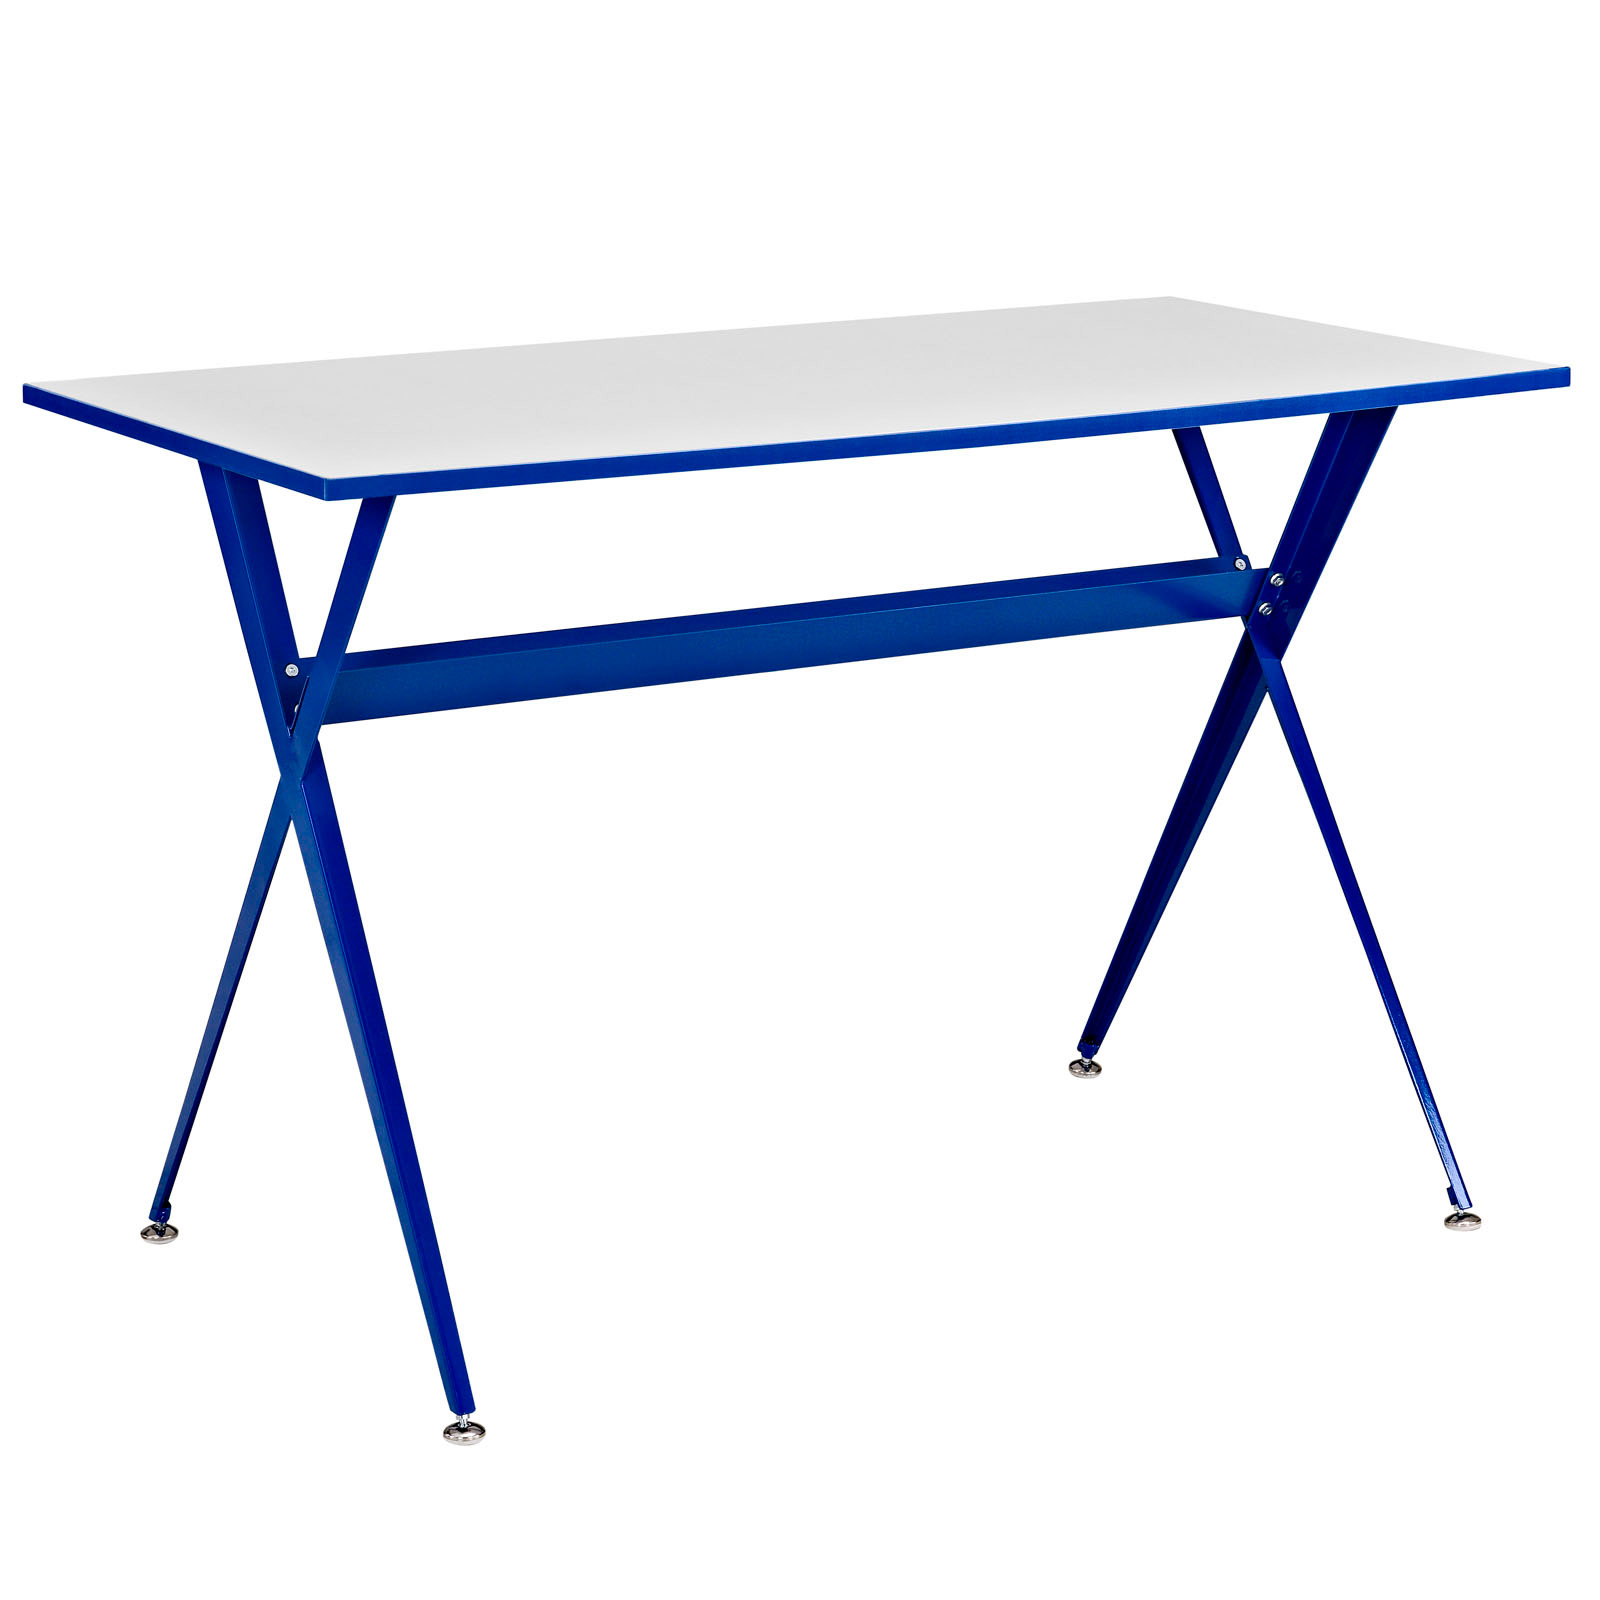 Space saving desk from Modway - Shown in Blue